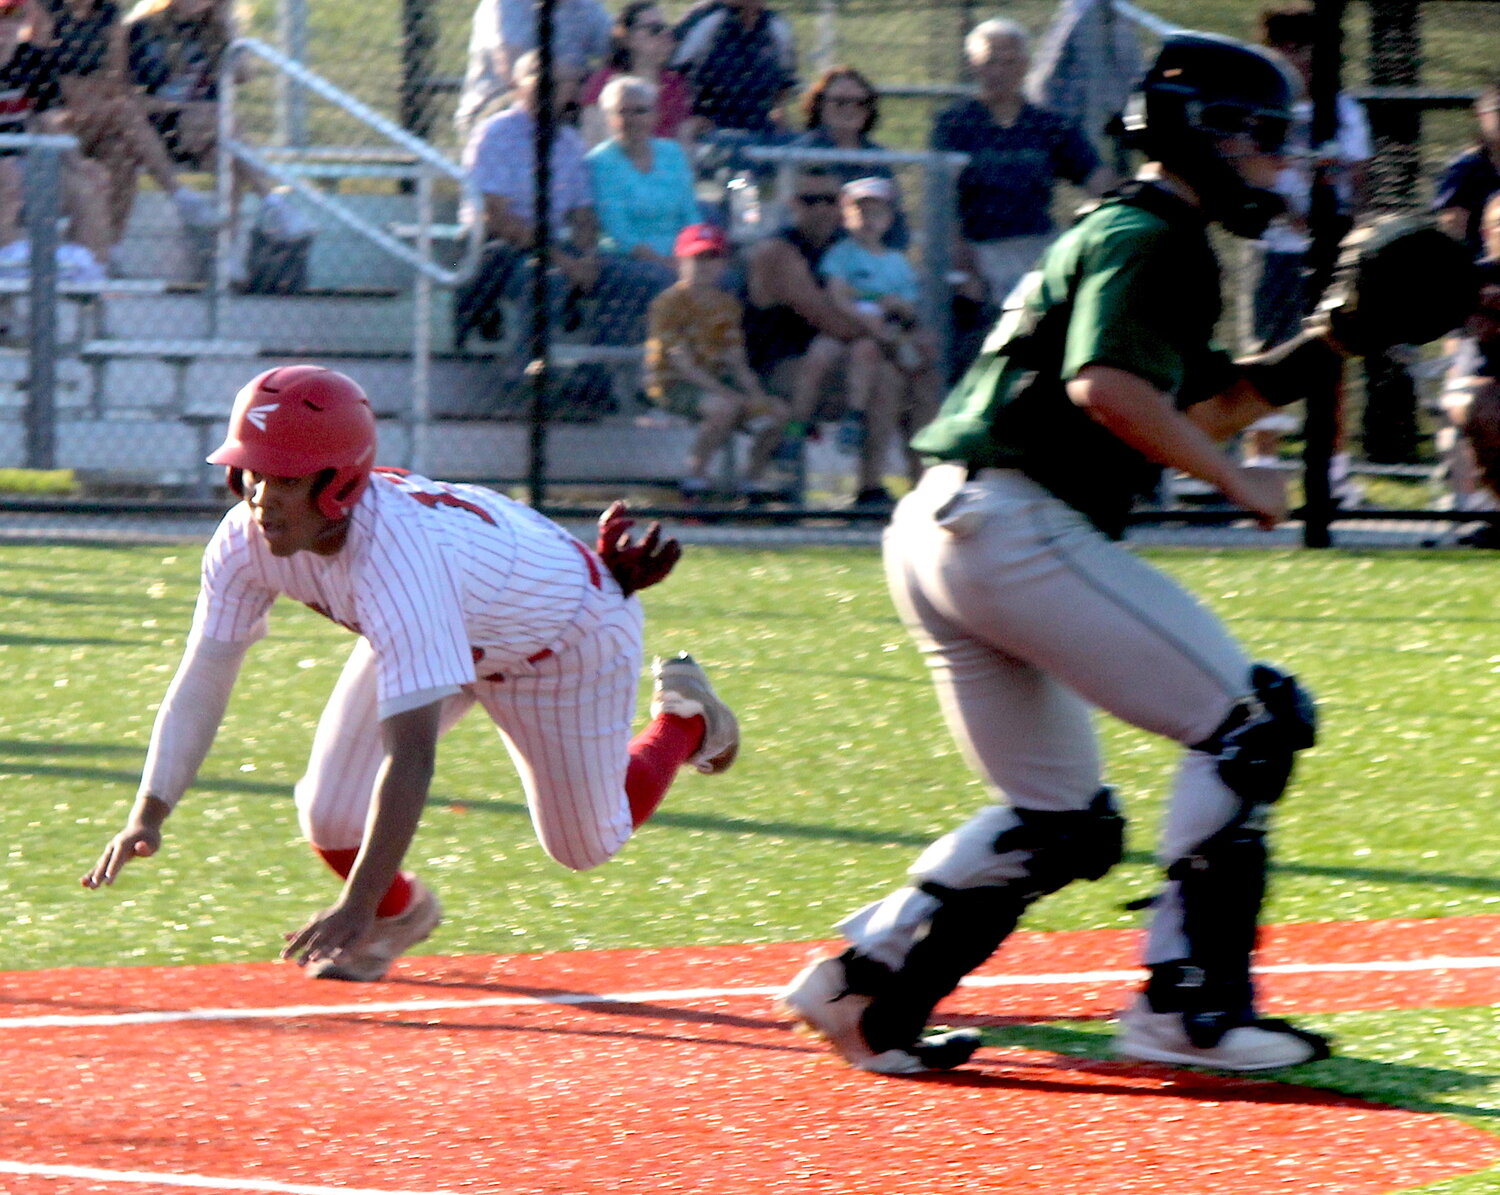 Zuriel Vargas slides safely into home with the third EPHS run of the first inning of the Townies' eventual 9-1 win over Ponaganset.